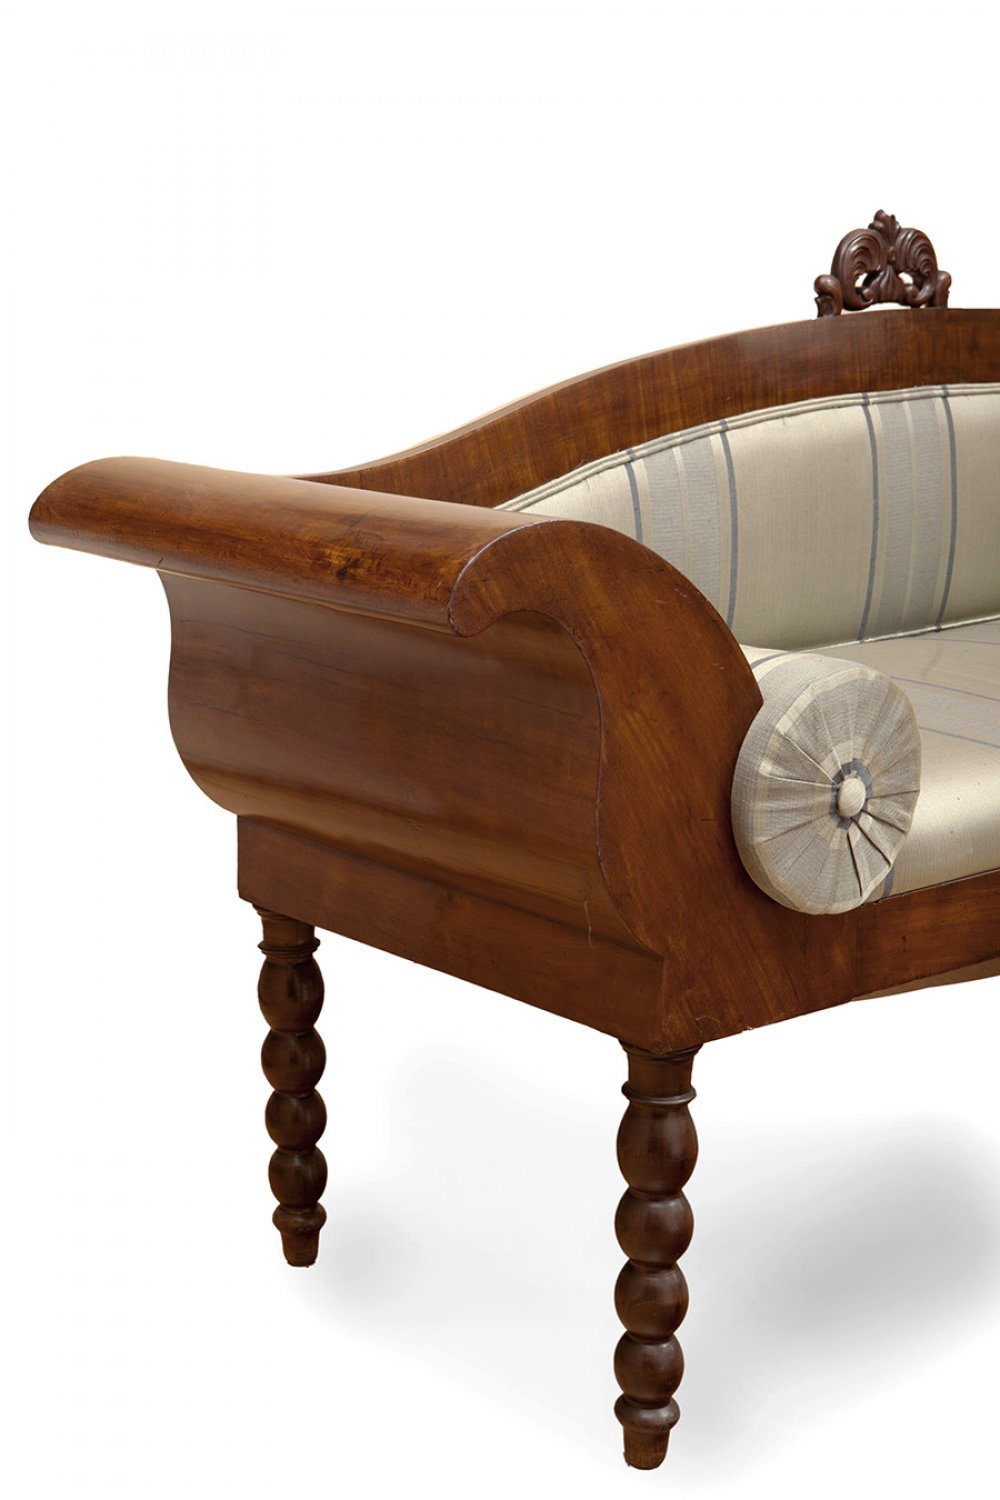 Fernandino bench; Spain, early 20th century.Walnut or oak wood with silk upholstery.Measurements: 93 - Image 4 of 4